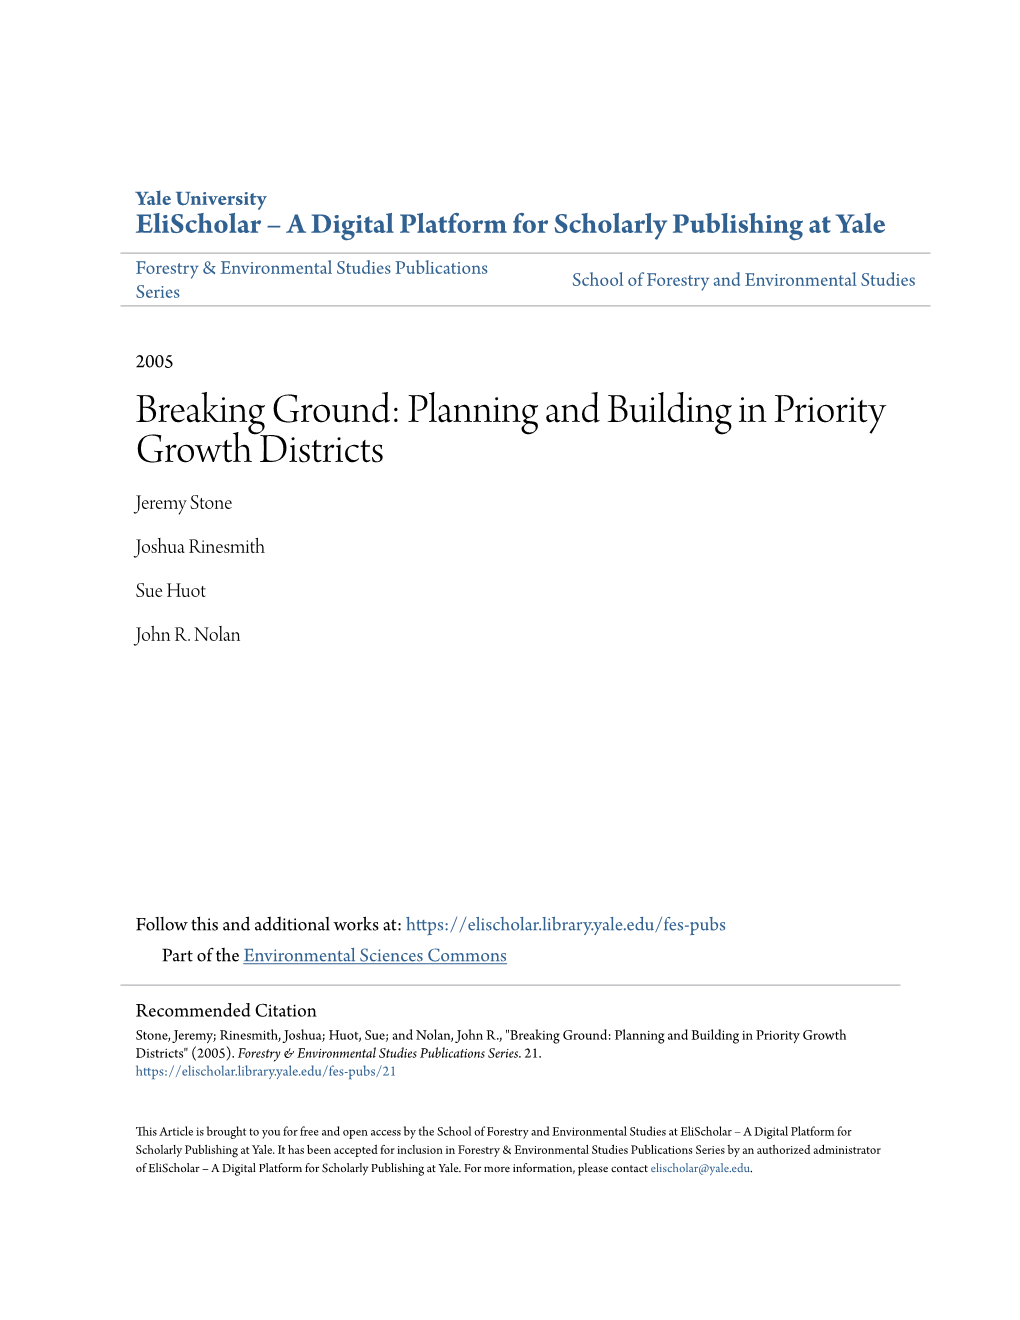 Breaking Ground: Planning and Building in Priority Growth Districts Jeremy Stone